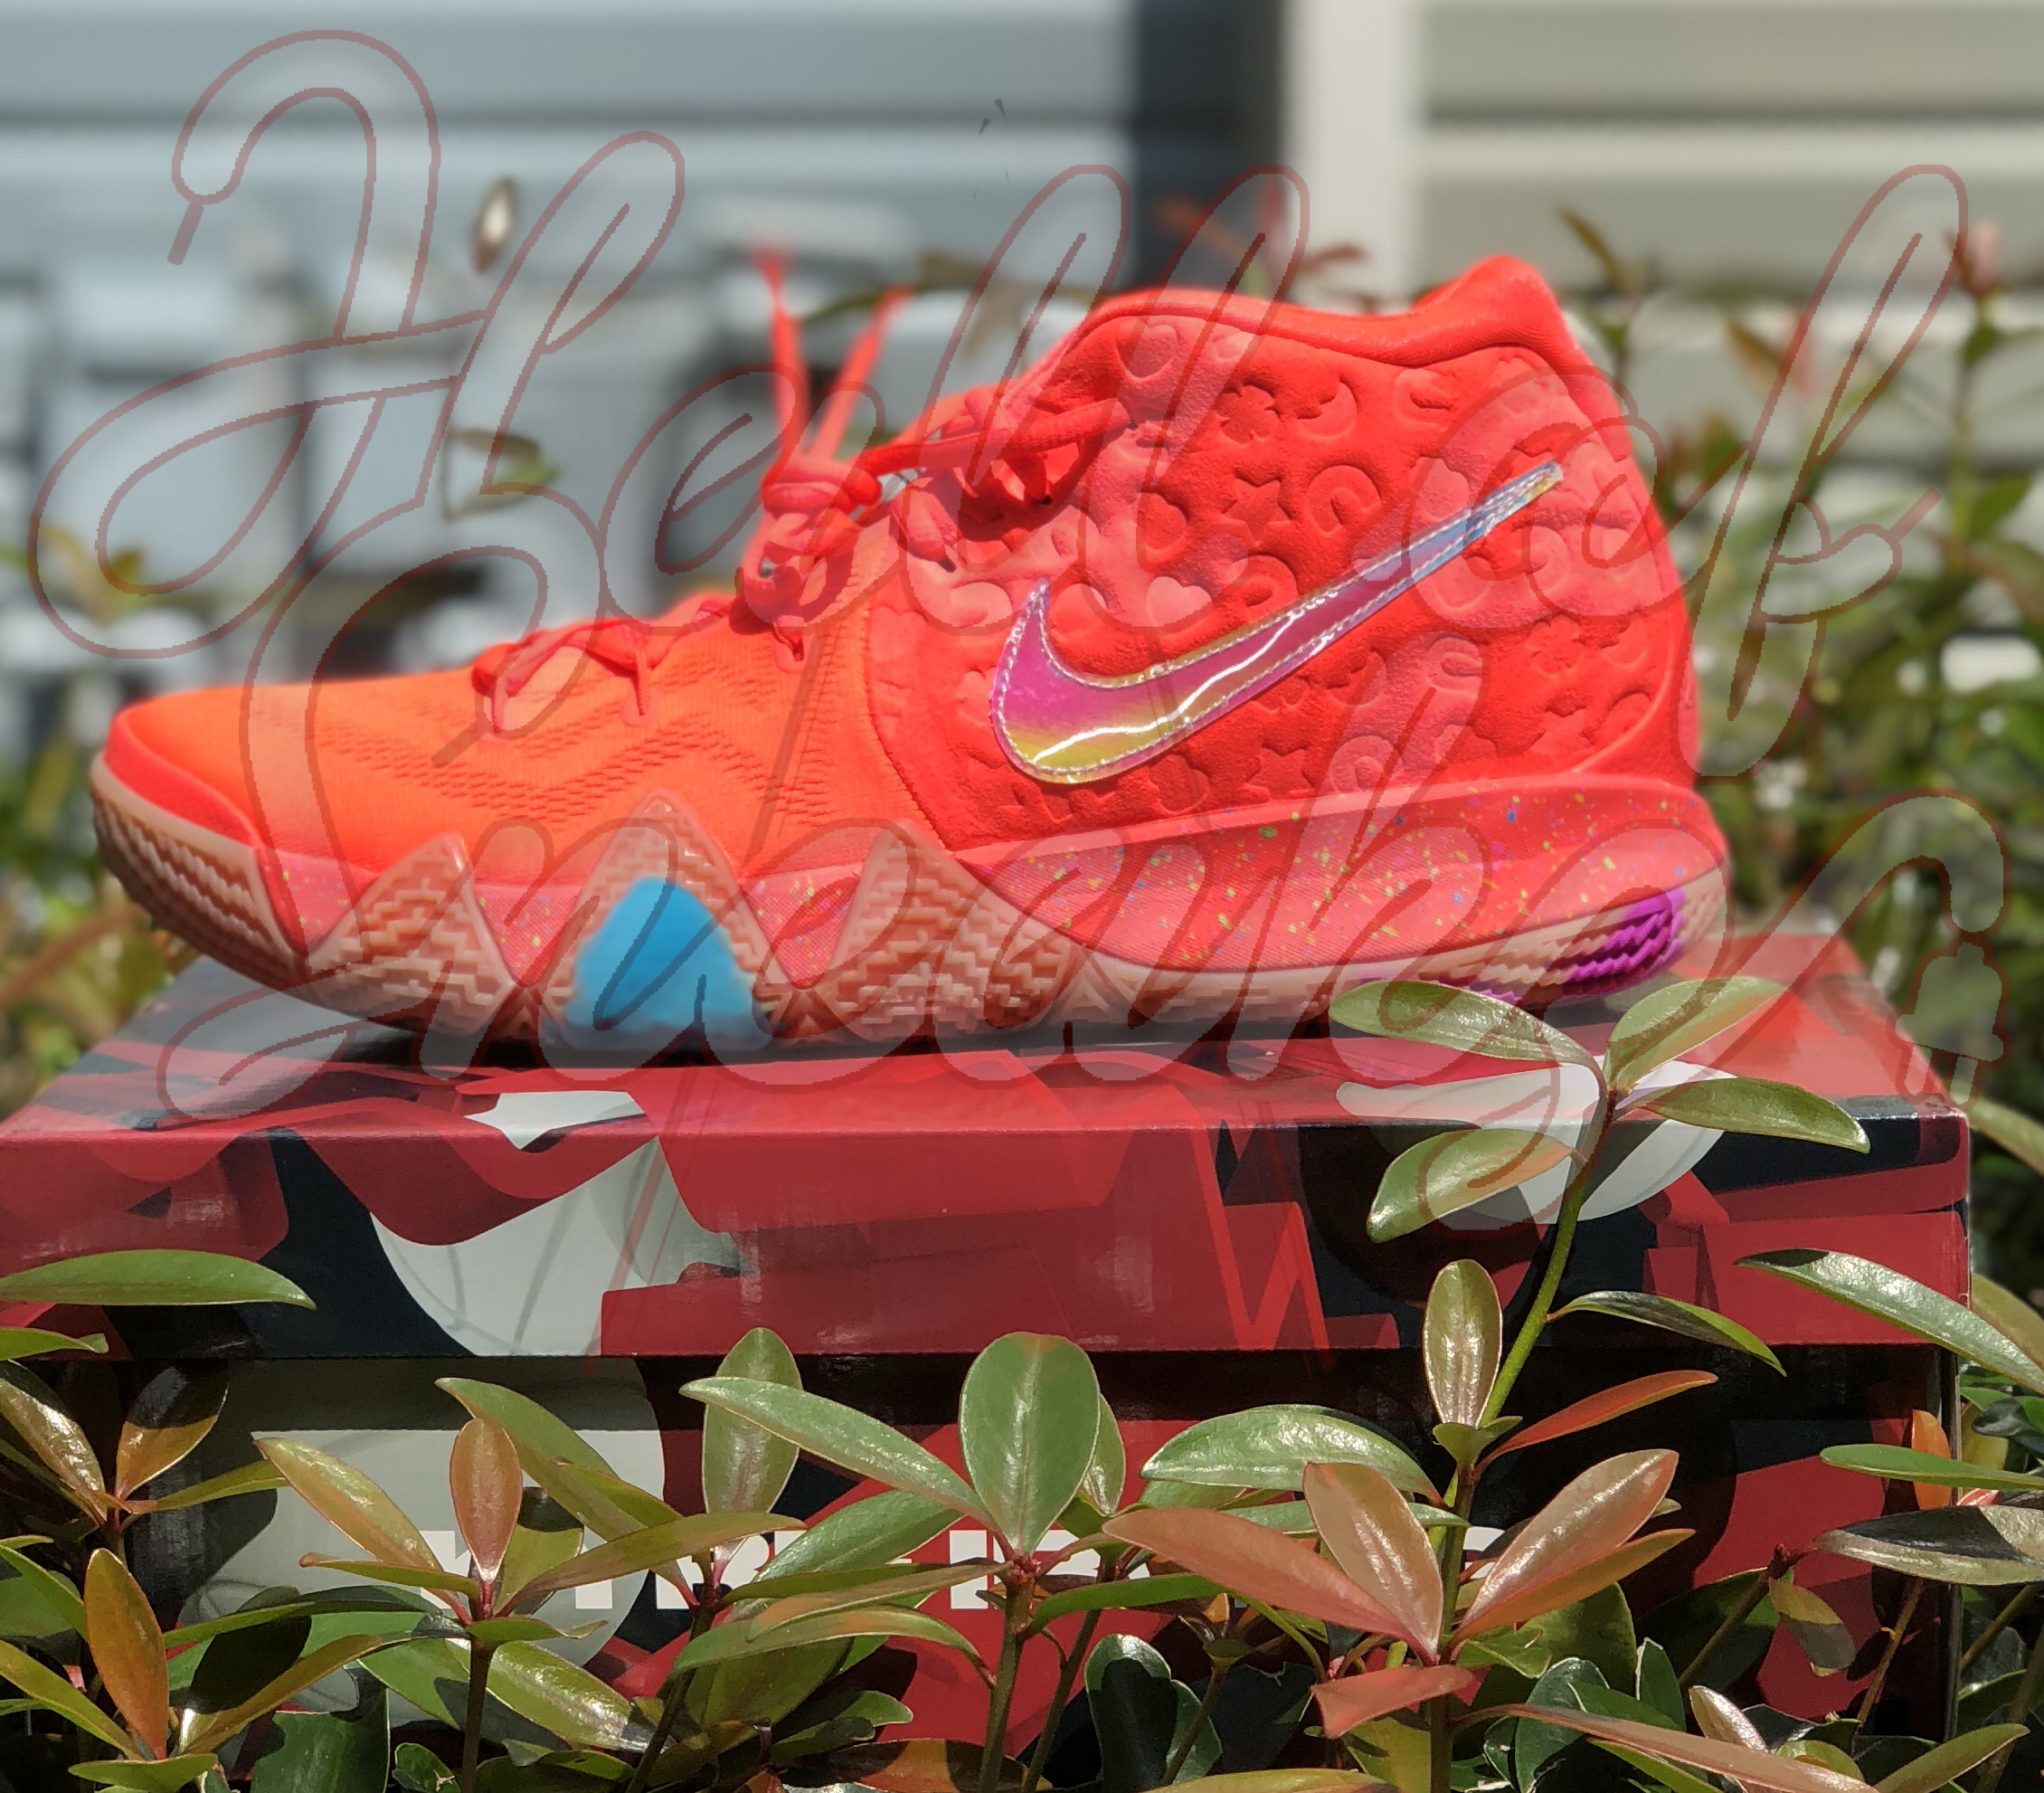 Kyrie 5 and kyrie fly trap 2 un boxing 's YouTube